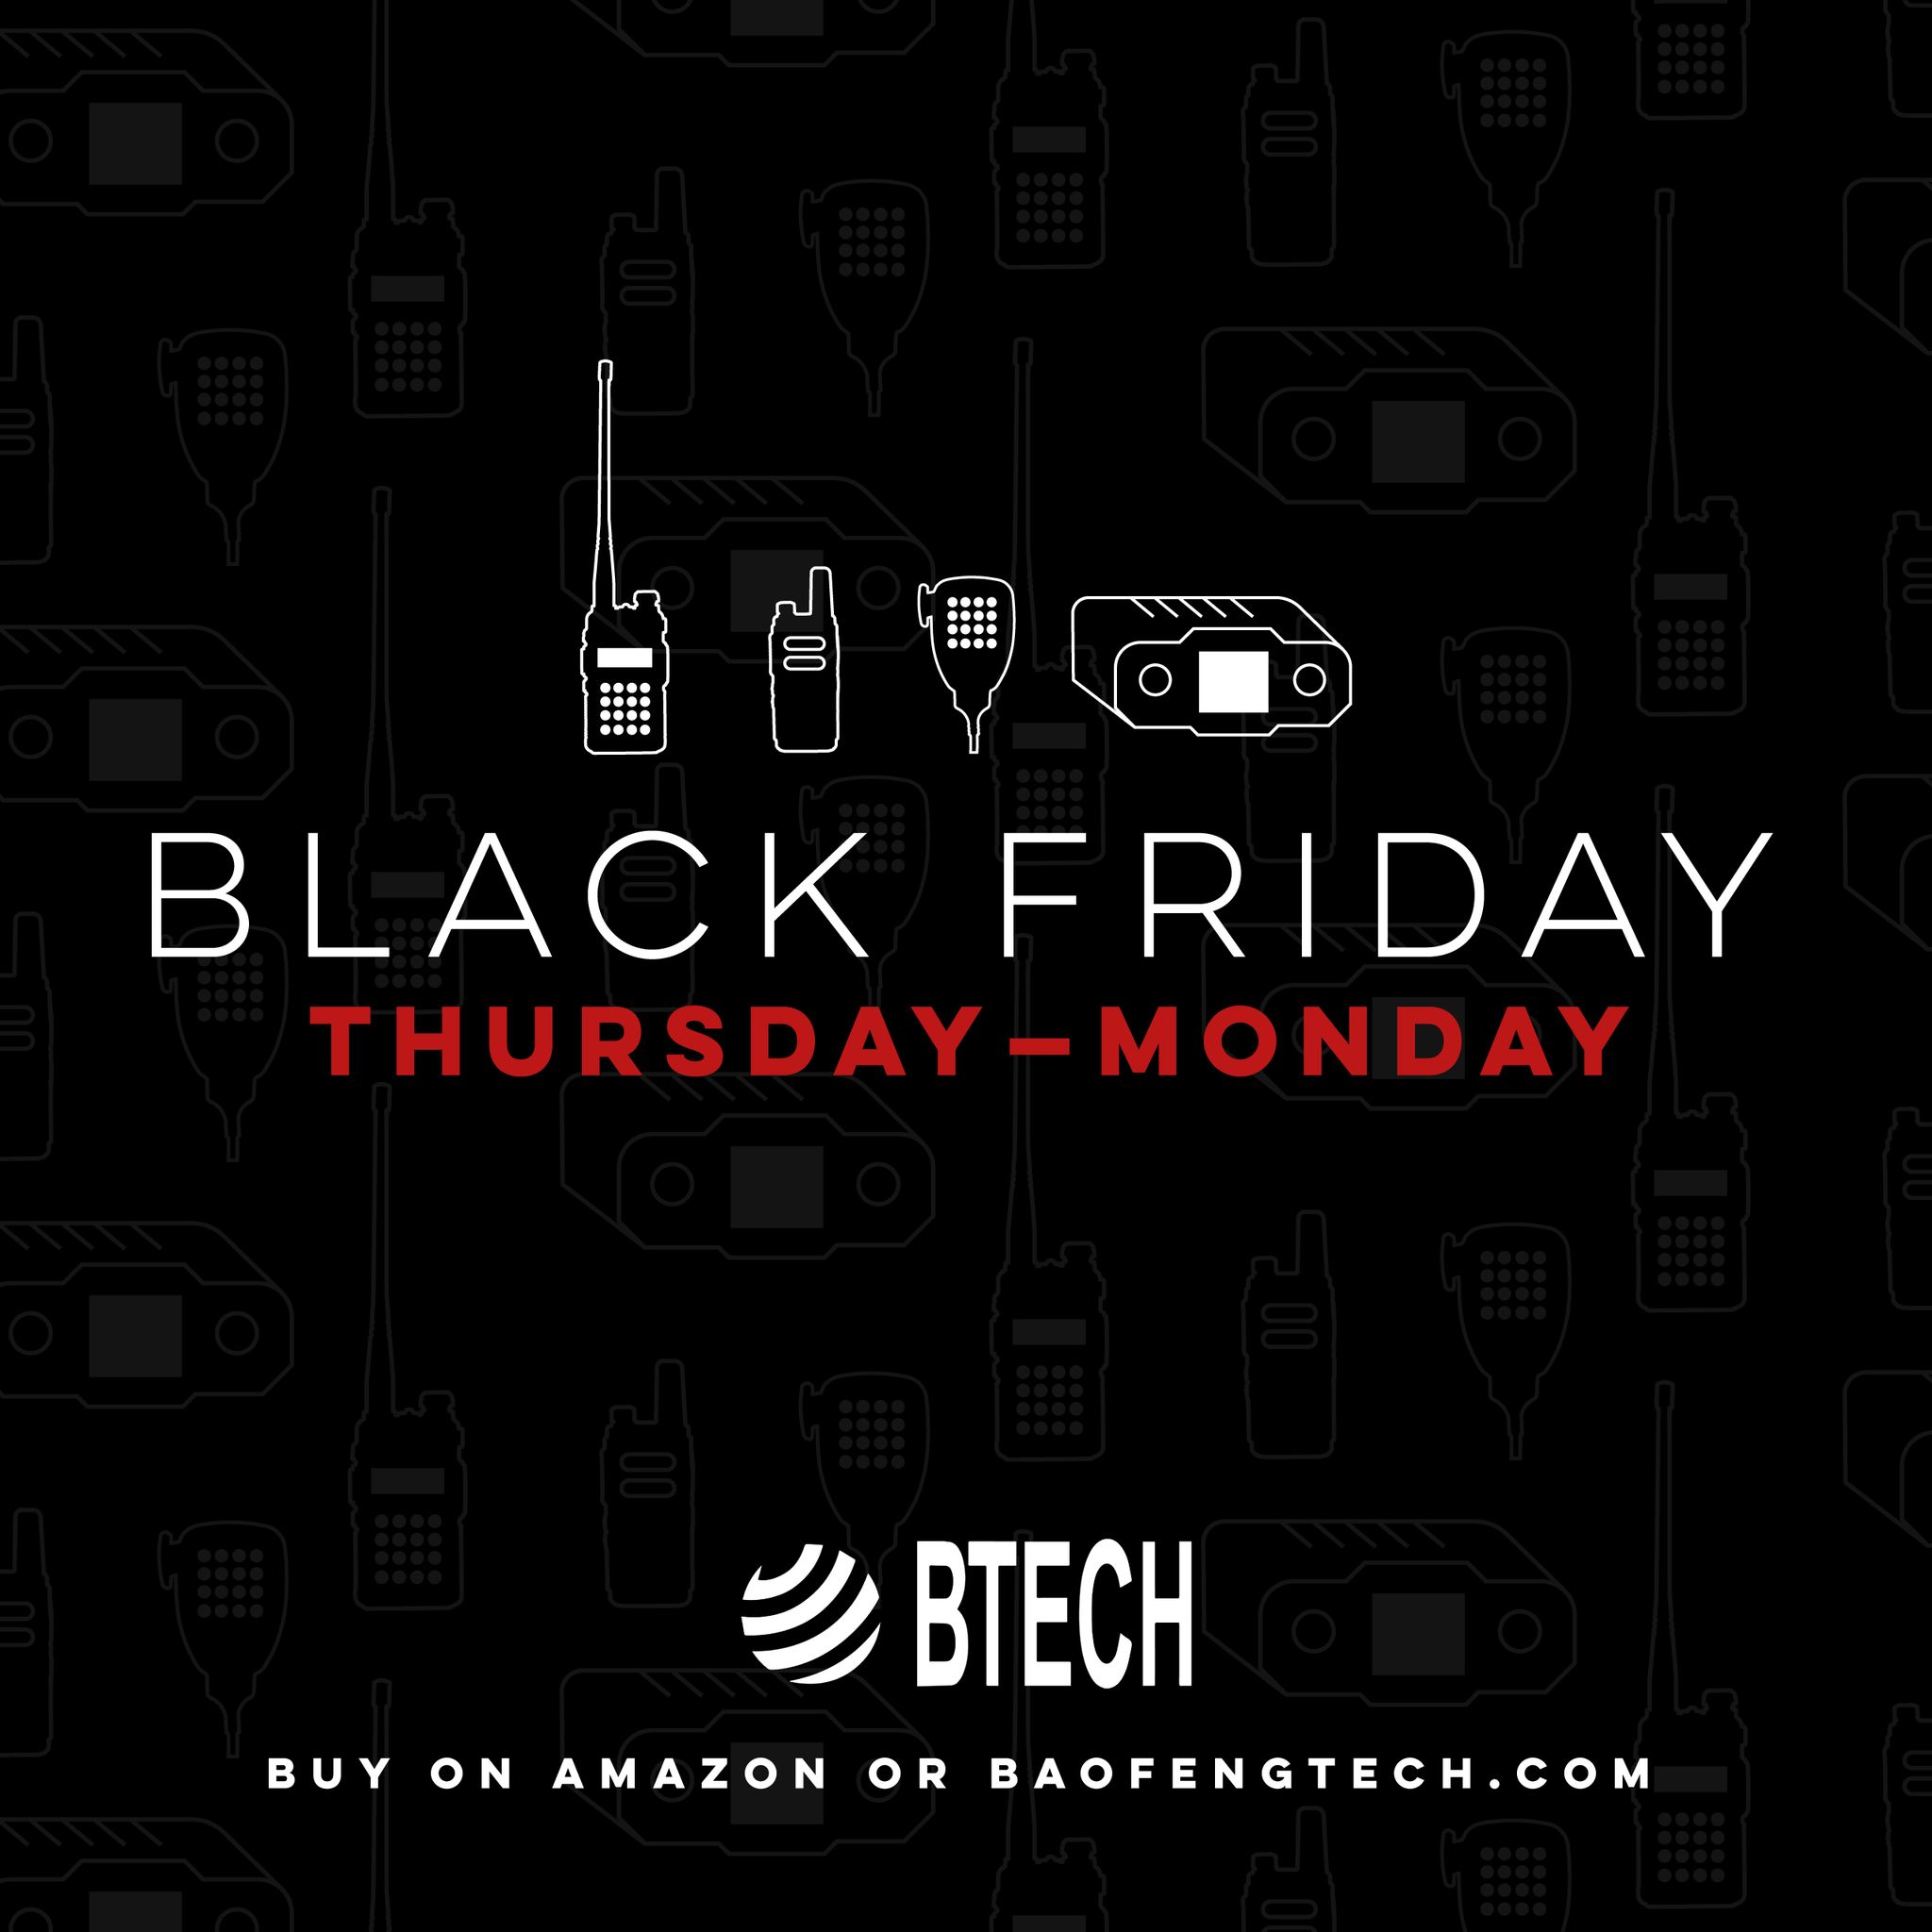 BLACK FRIDAY IS HERE!! We have an assortment of handheld radios on sale for $50 and mobile radios starting at $99. Get equipped for the holiday season.

See all the deals live at: https://baofengtech.com/store
 
#blackfriday #holidays #gifts #radio #hamradio #walkietalkie #btech #fenggang #communications #survival #adventure #outdoors #prep #prepared #frs #gmrs #murs #sale